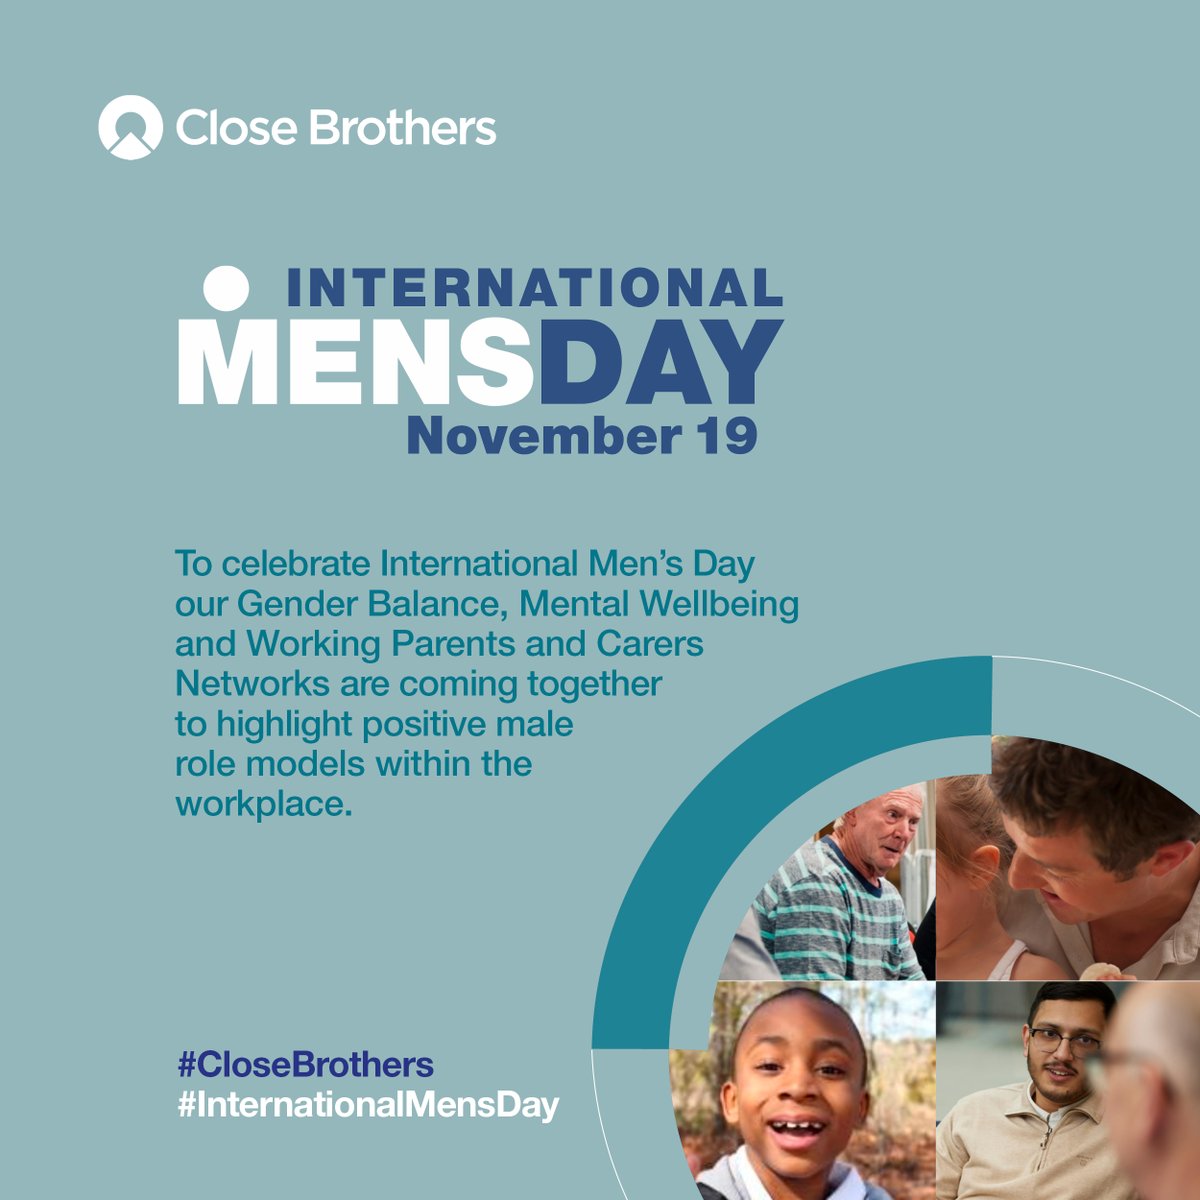 To celebrate International Men’s Day our Gender Balance, Mental Wellbeing and Working Parents and Carers Networks are coming together to highlight positive male role models within the workplace. #CloseBrothers #InternationalMensDay